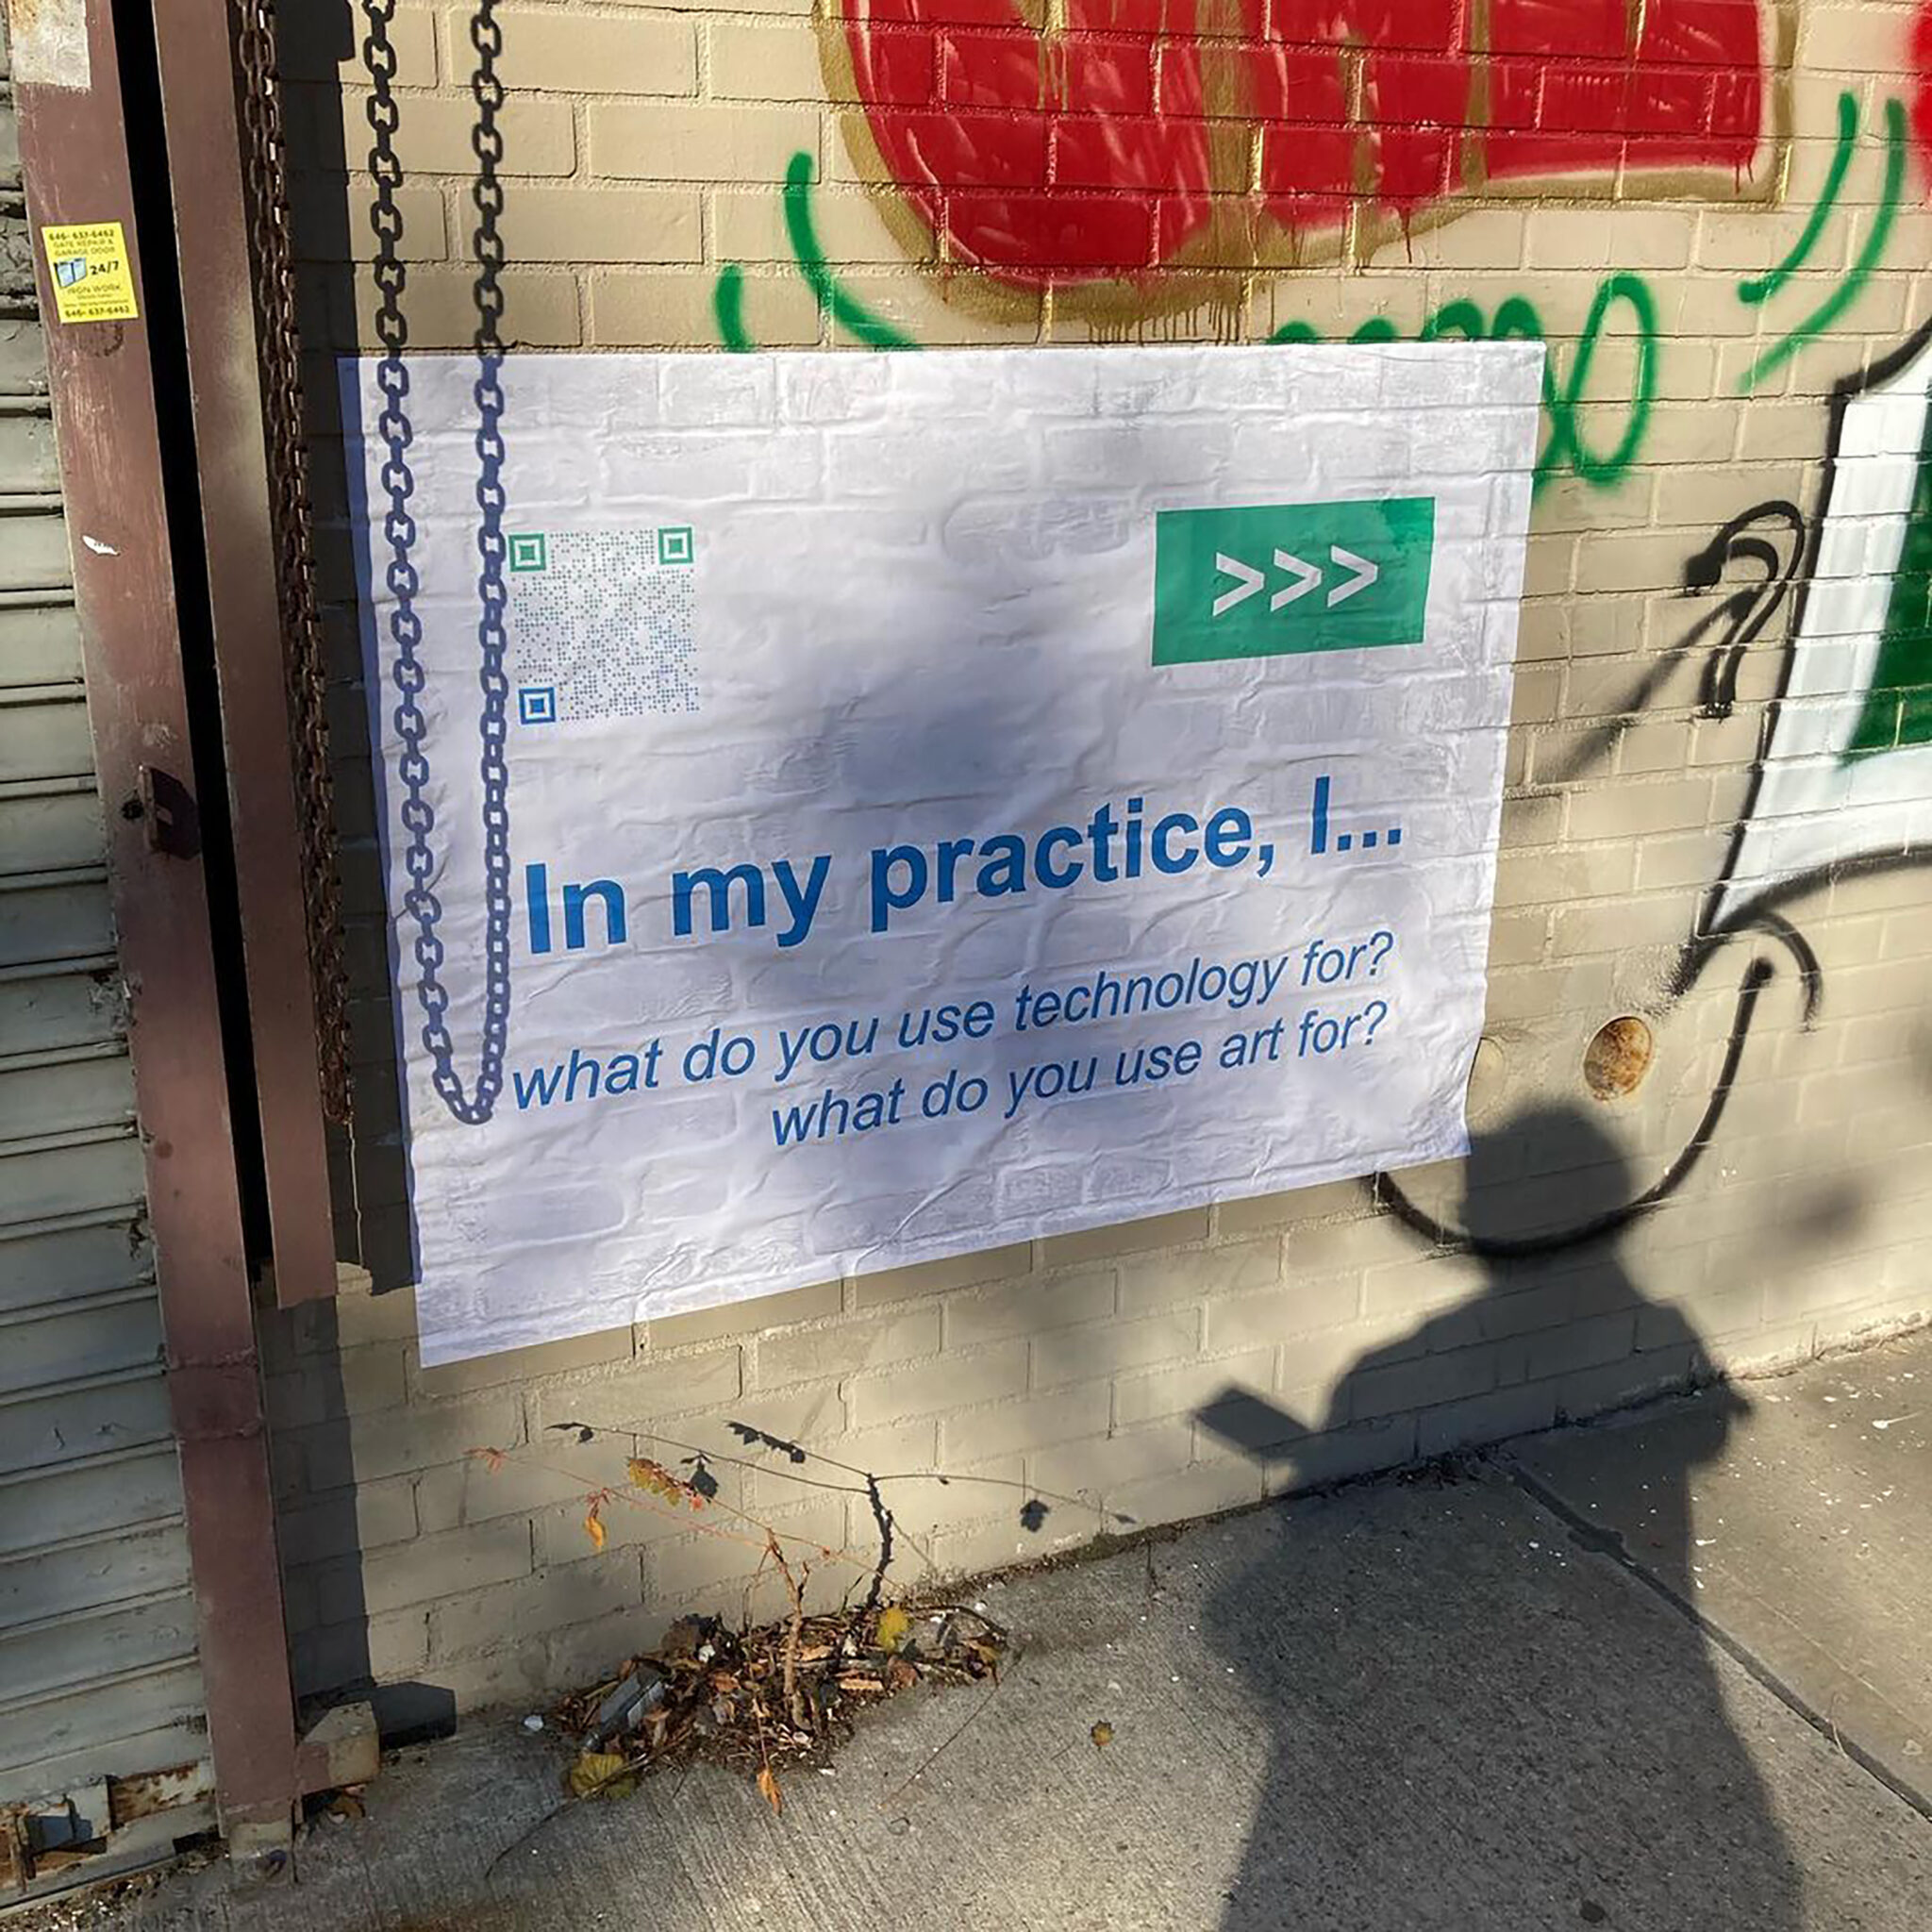 Pictured is a wheatpasted poster with the words, "In my Practice, I"..." prompting the viewer to answer the question of "what do you use technology for? what do you use art for?" on a wall with scribbles of graffitti and tags in many colors.